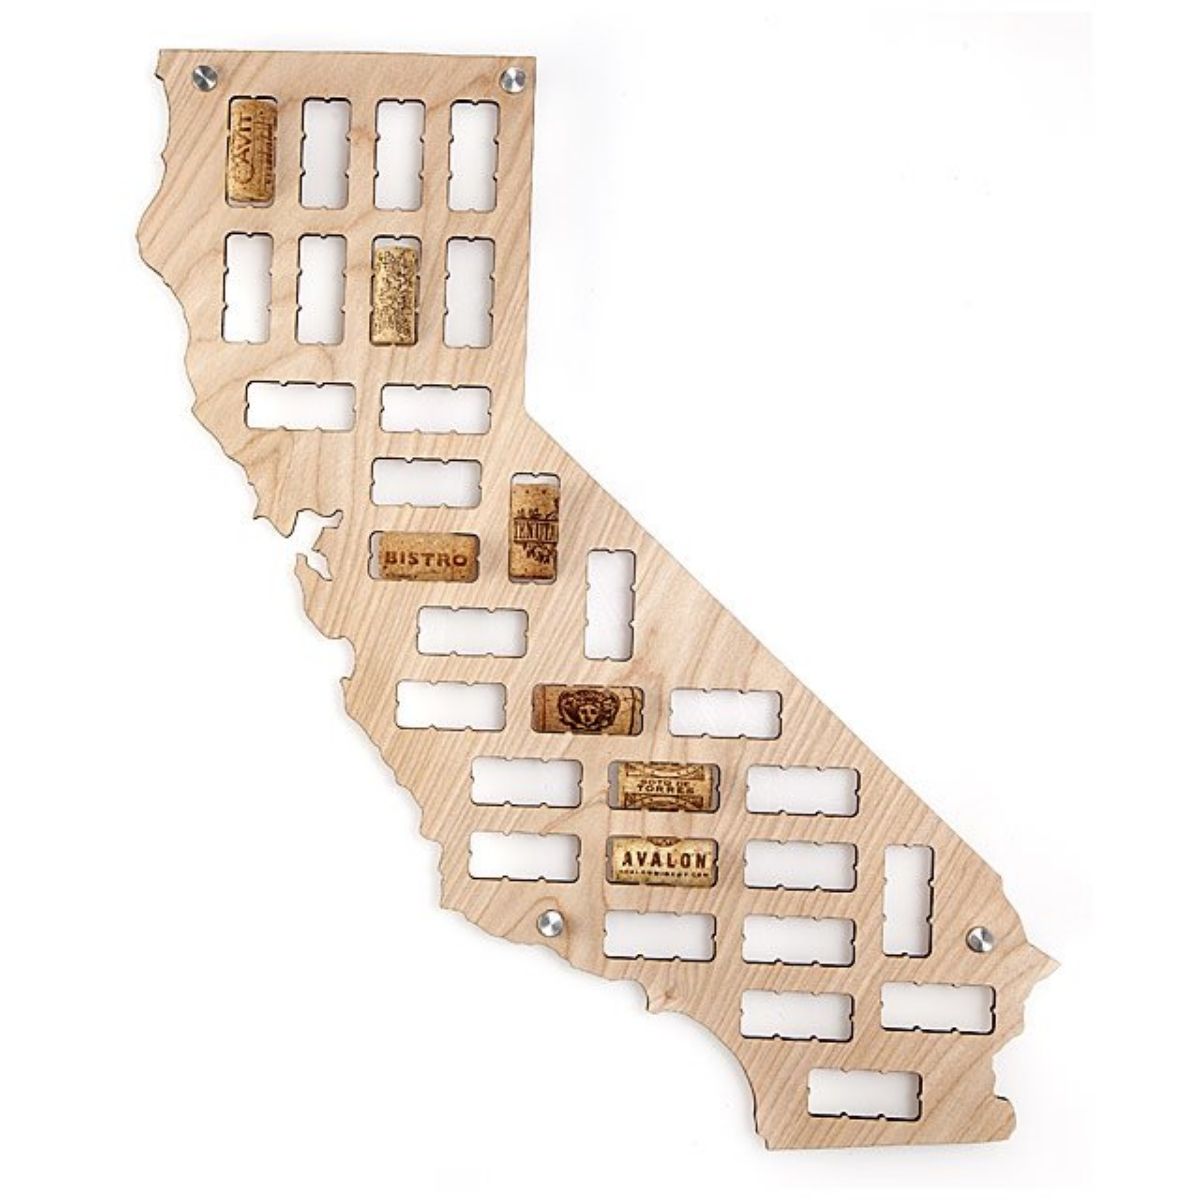 The Best Gifts for Wine Lovers Option: Wine Cork States